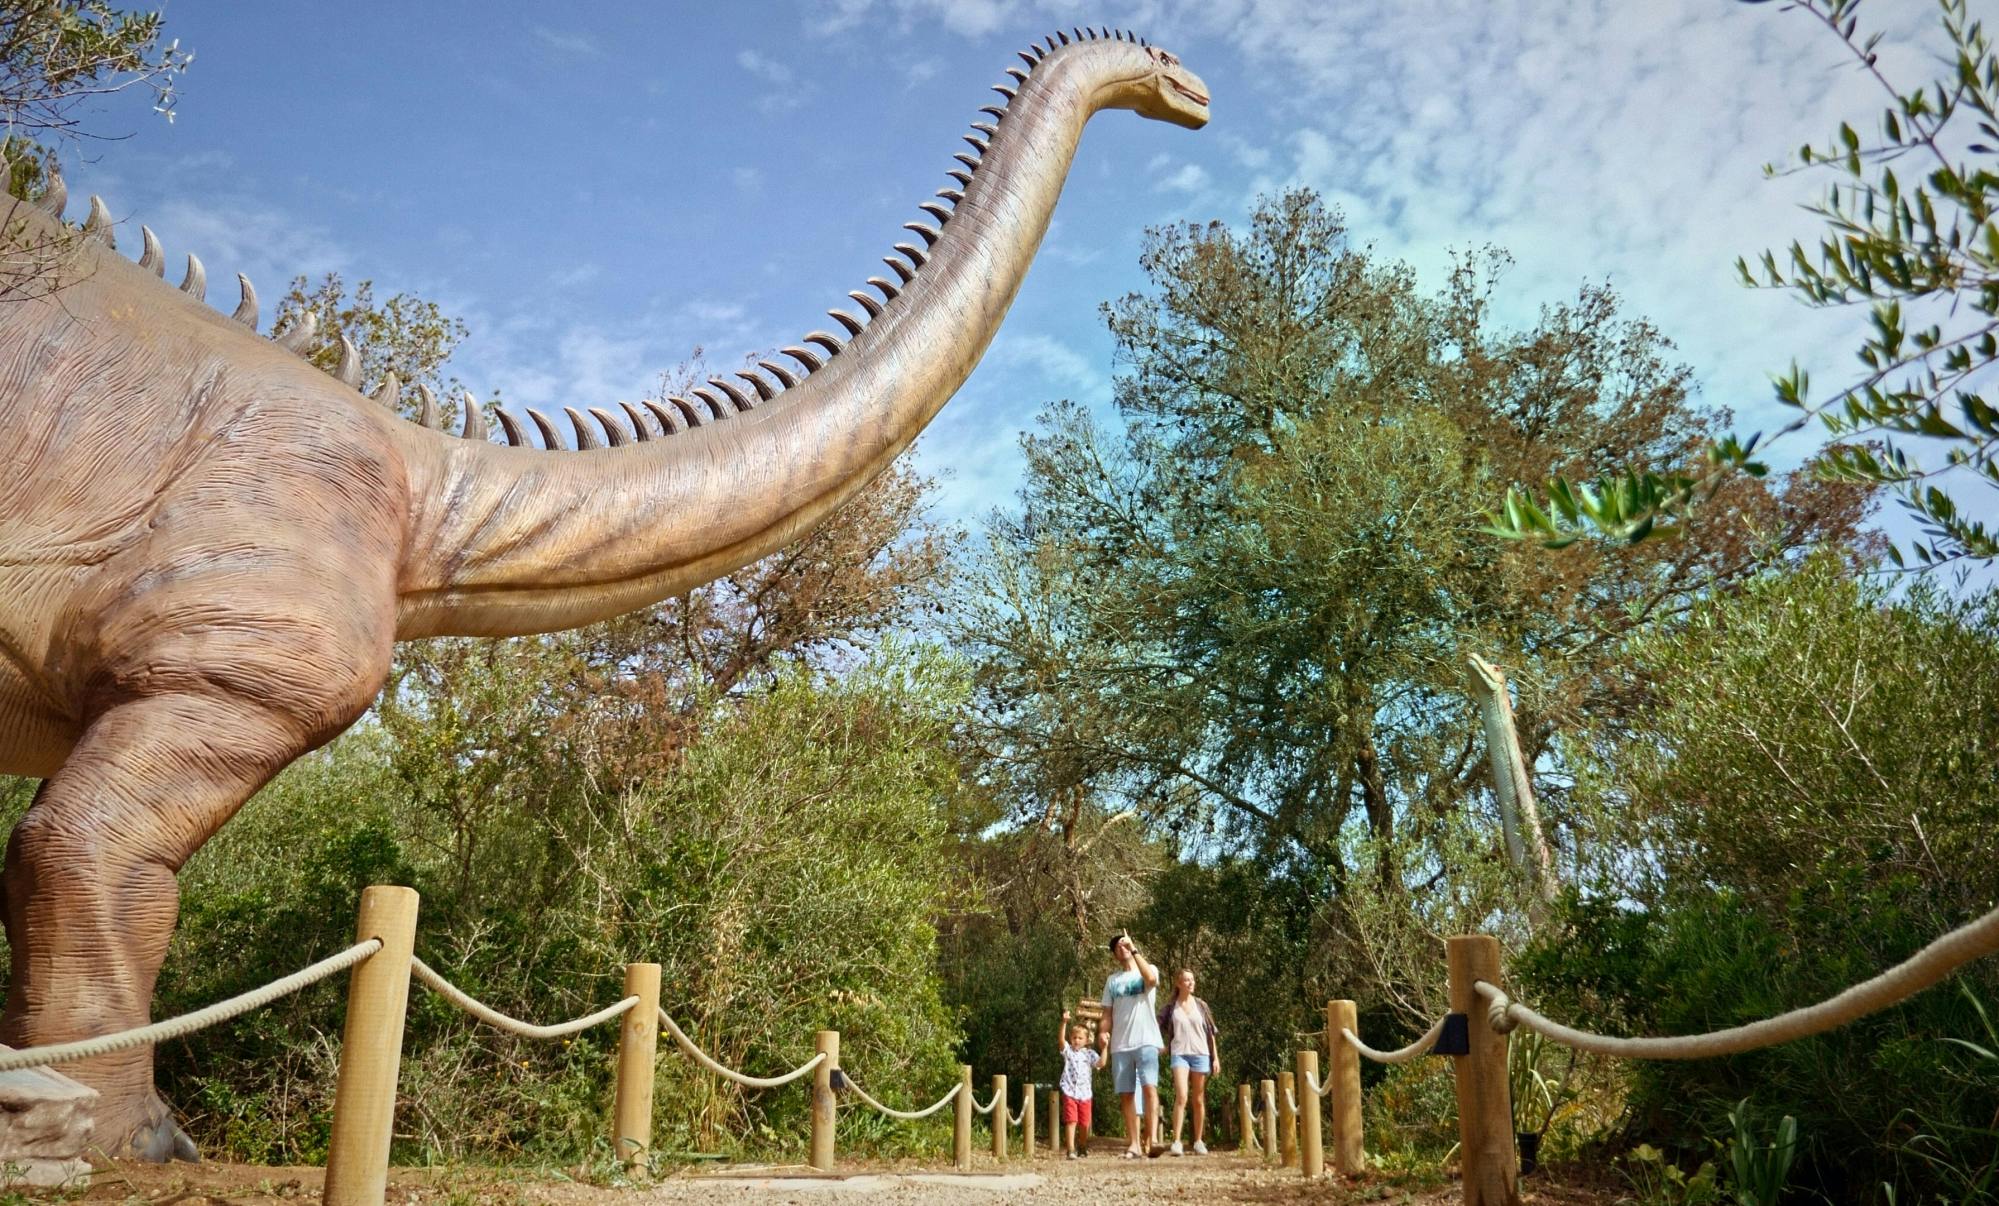 Guided Tour of Hams Caves with Dinosaurland Visit